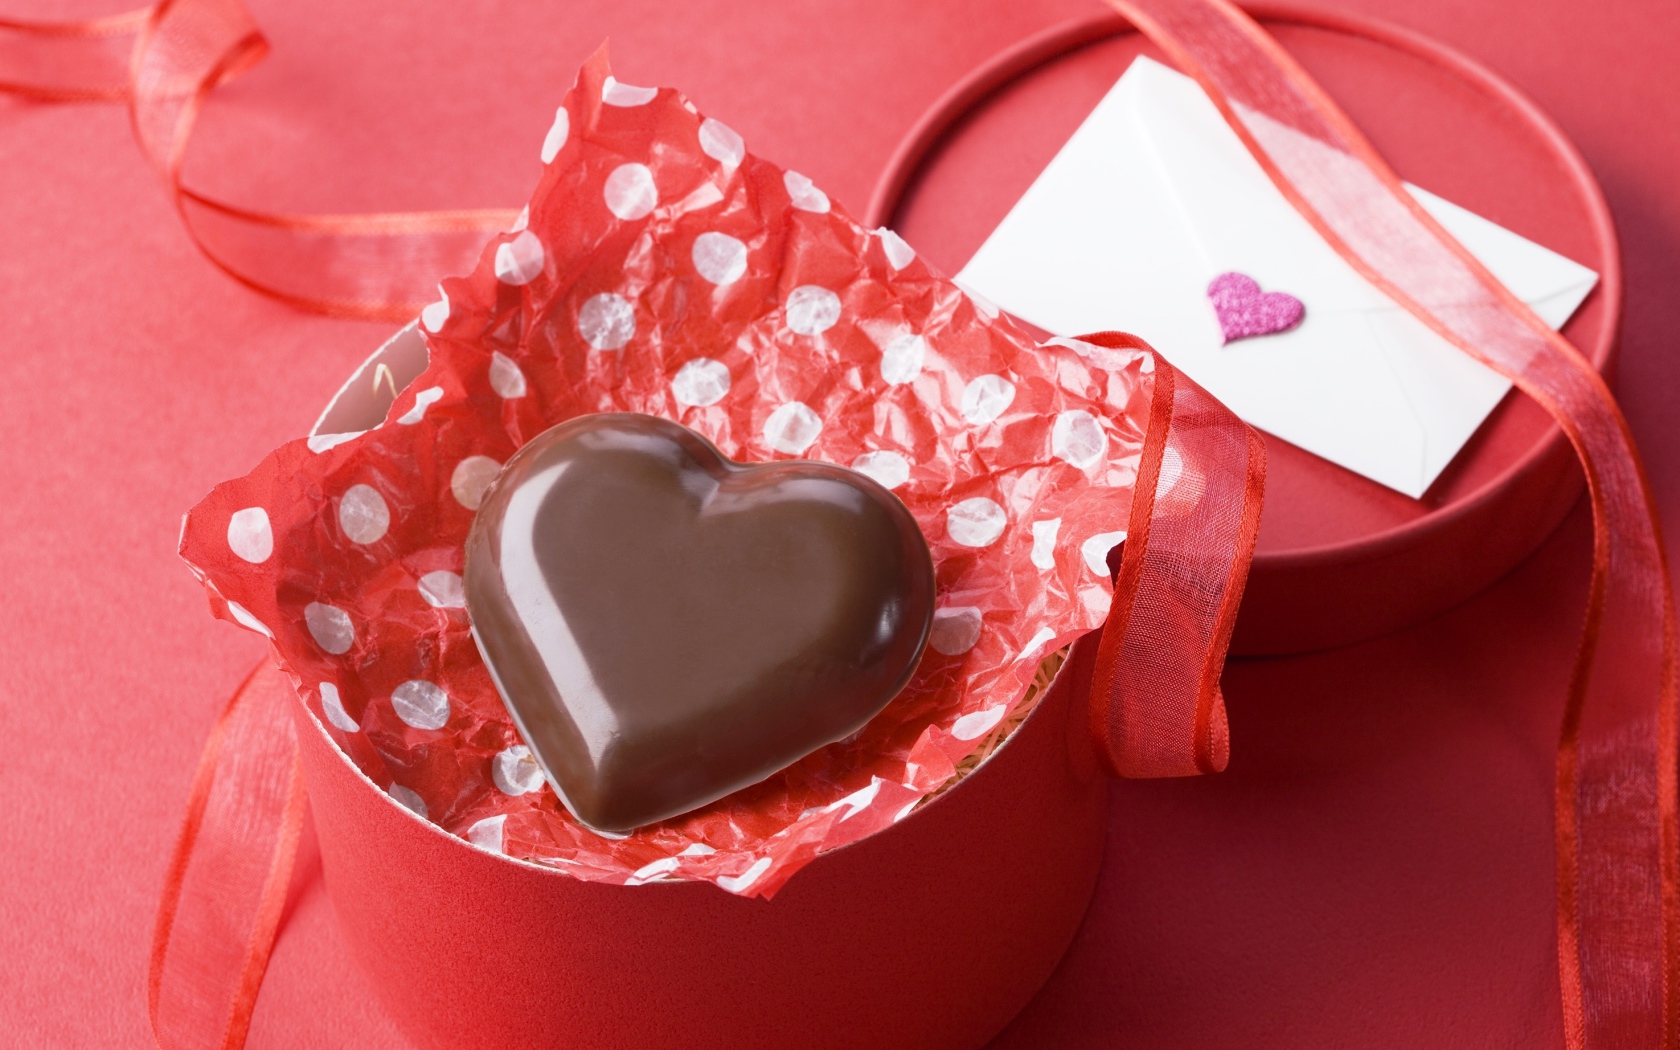 Chocolate heart to a round pink gift box